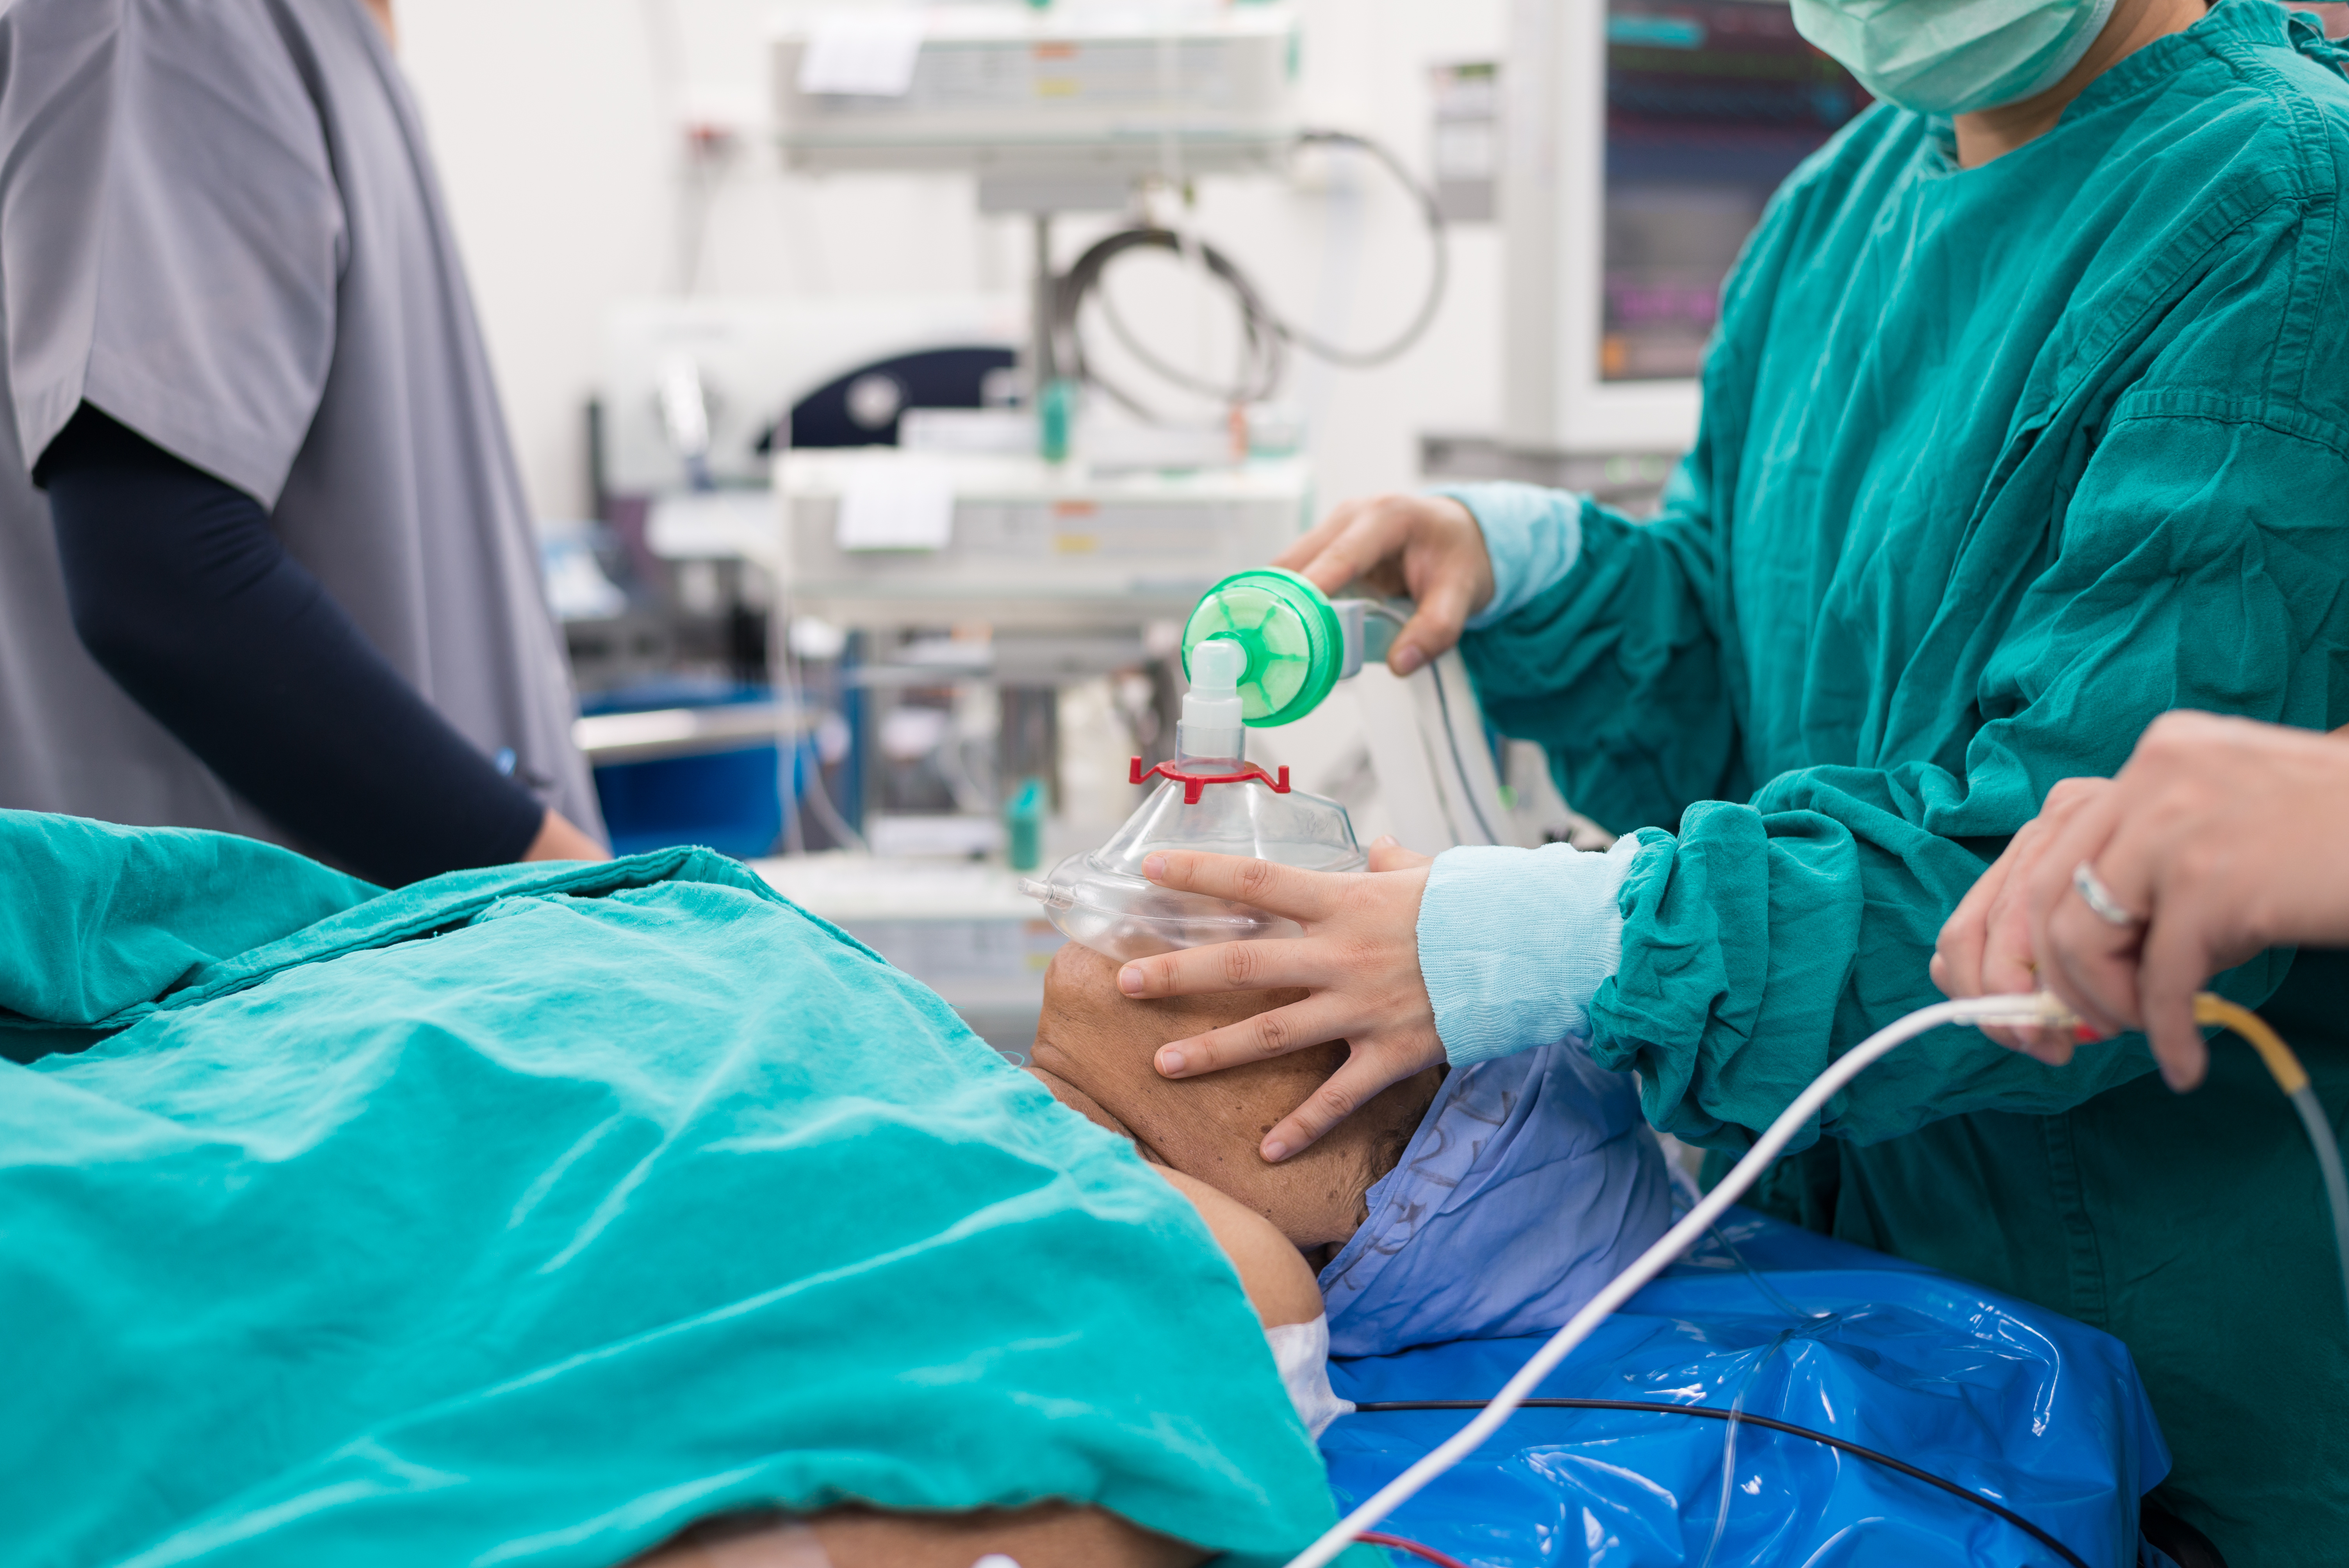 New algorithms show accuracy, reliability in gauging unconsciousness under general anesthesia